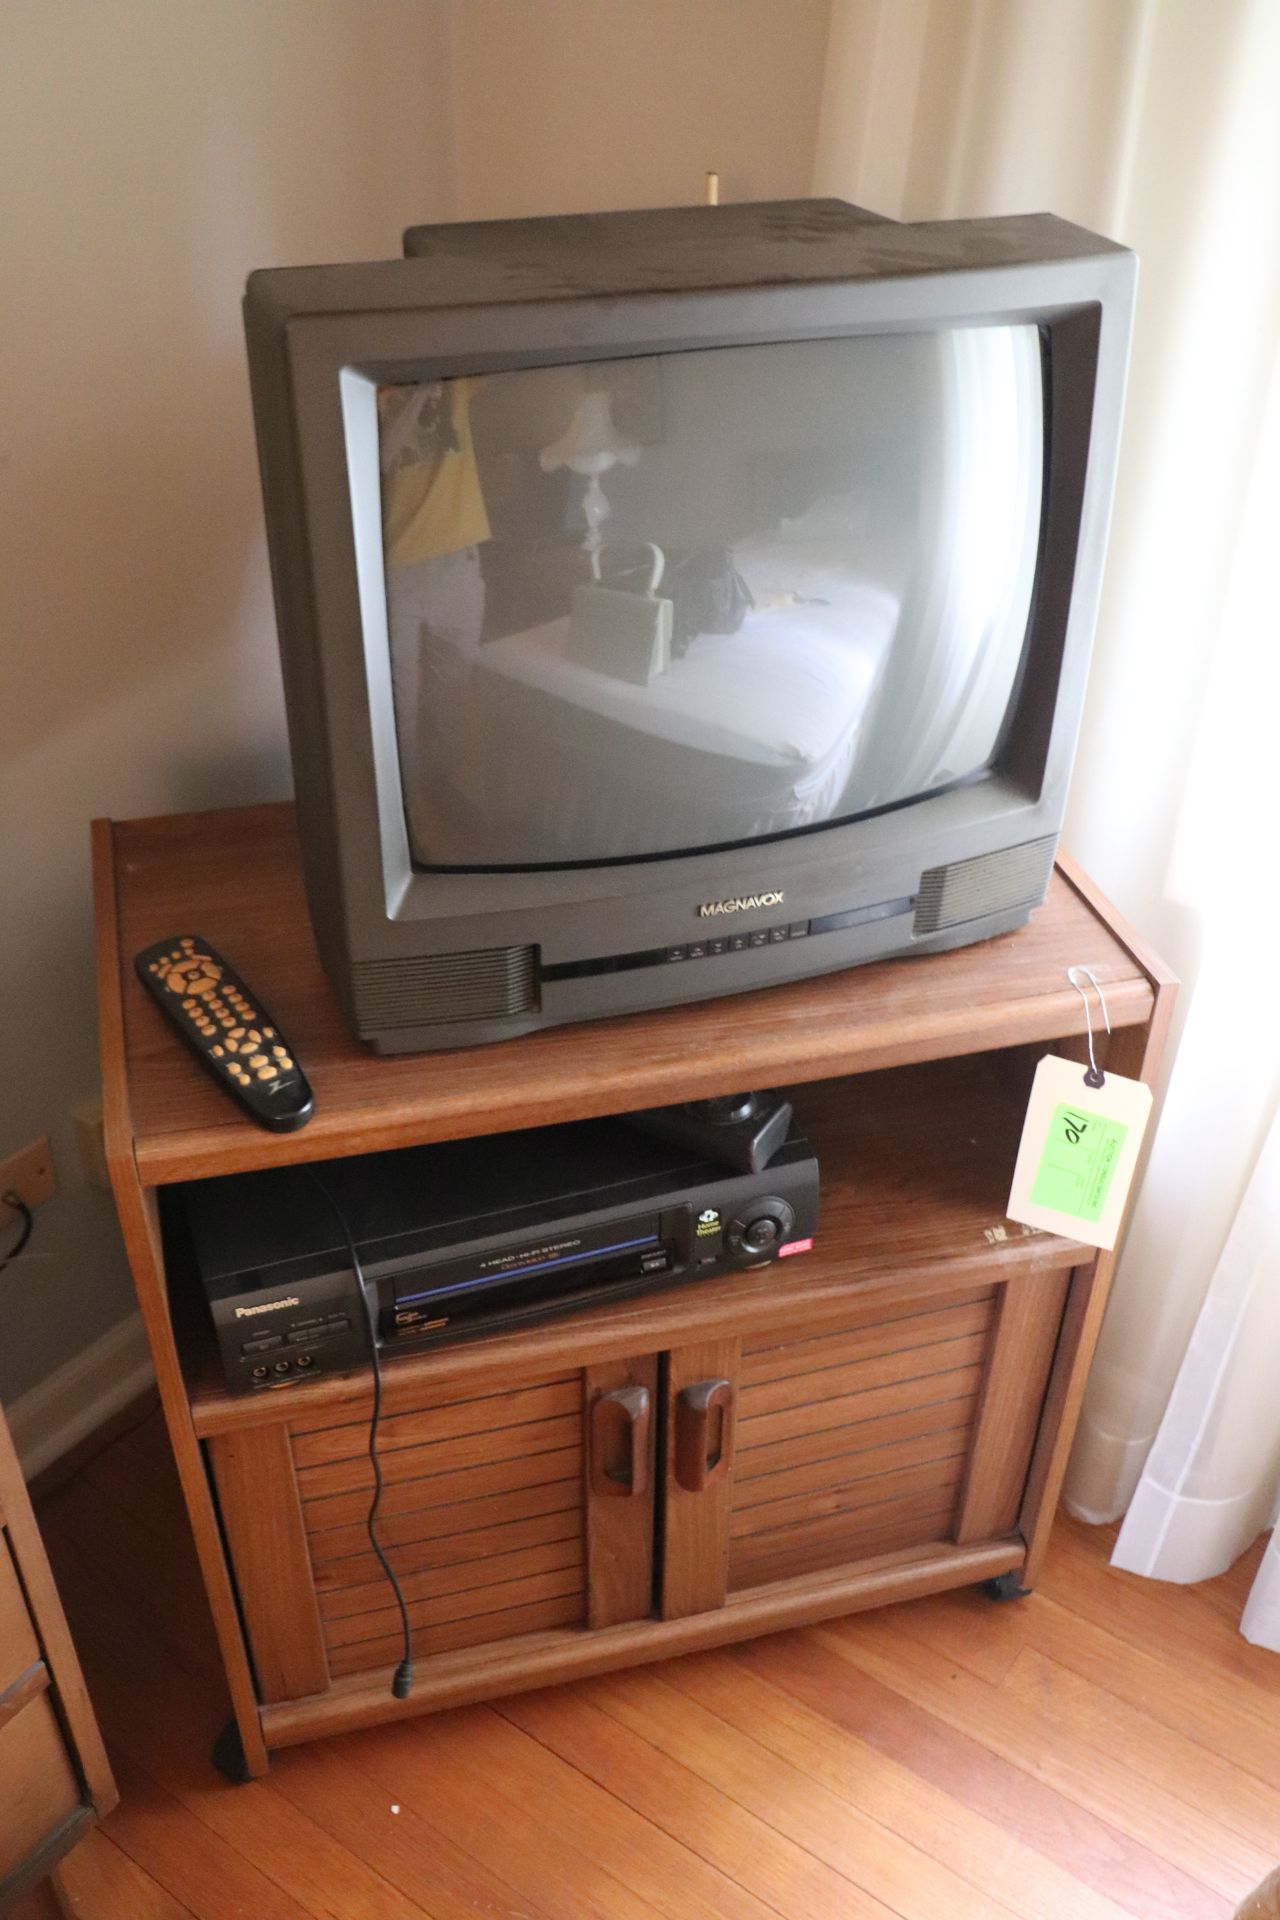 Group: Magnavox television, 20", Panasonic Omnivision VCR, and TV stand